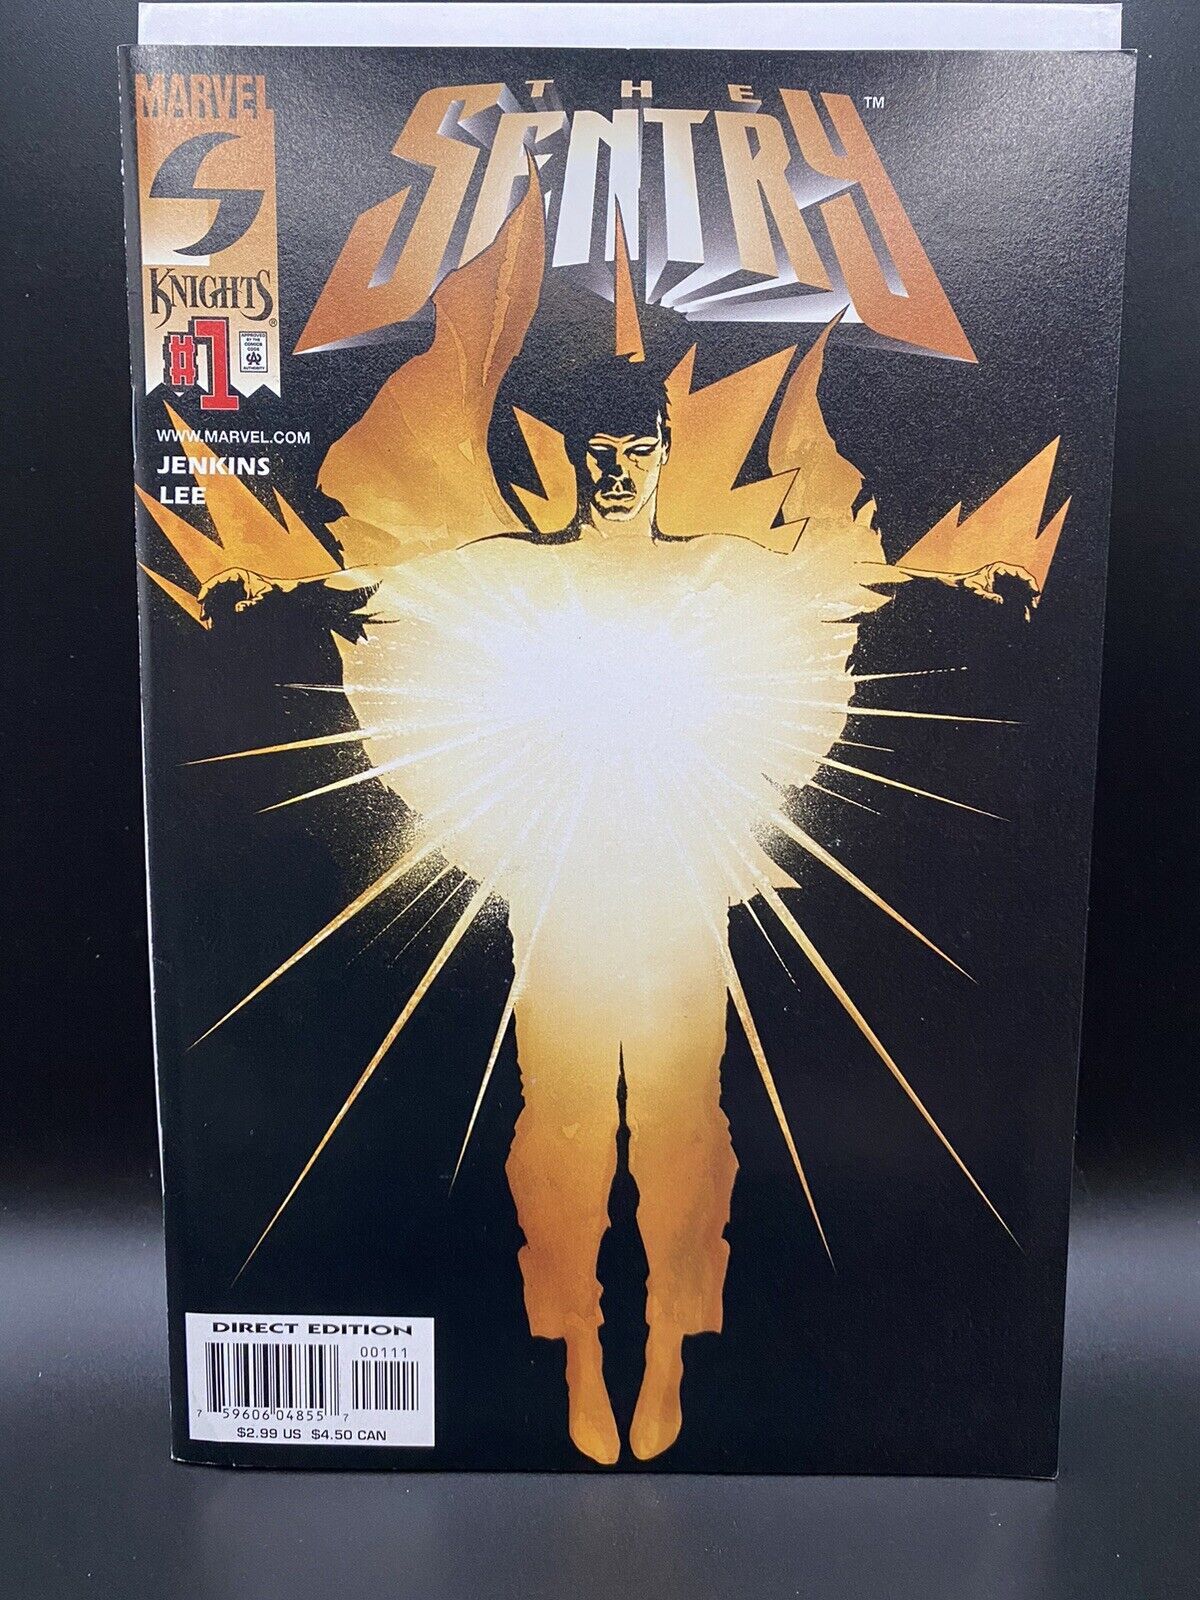 The Sentry #1 Vol 1 (2000) First Appearance of Sentry and The Void